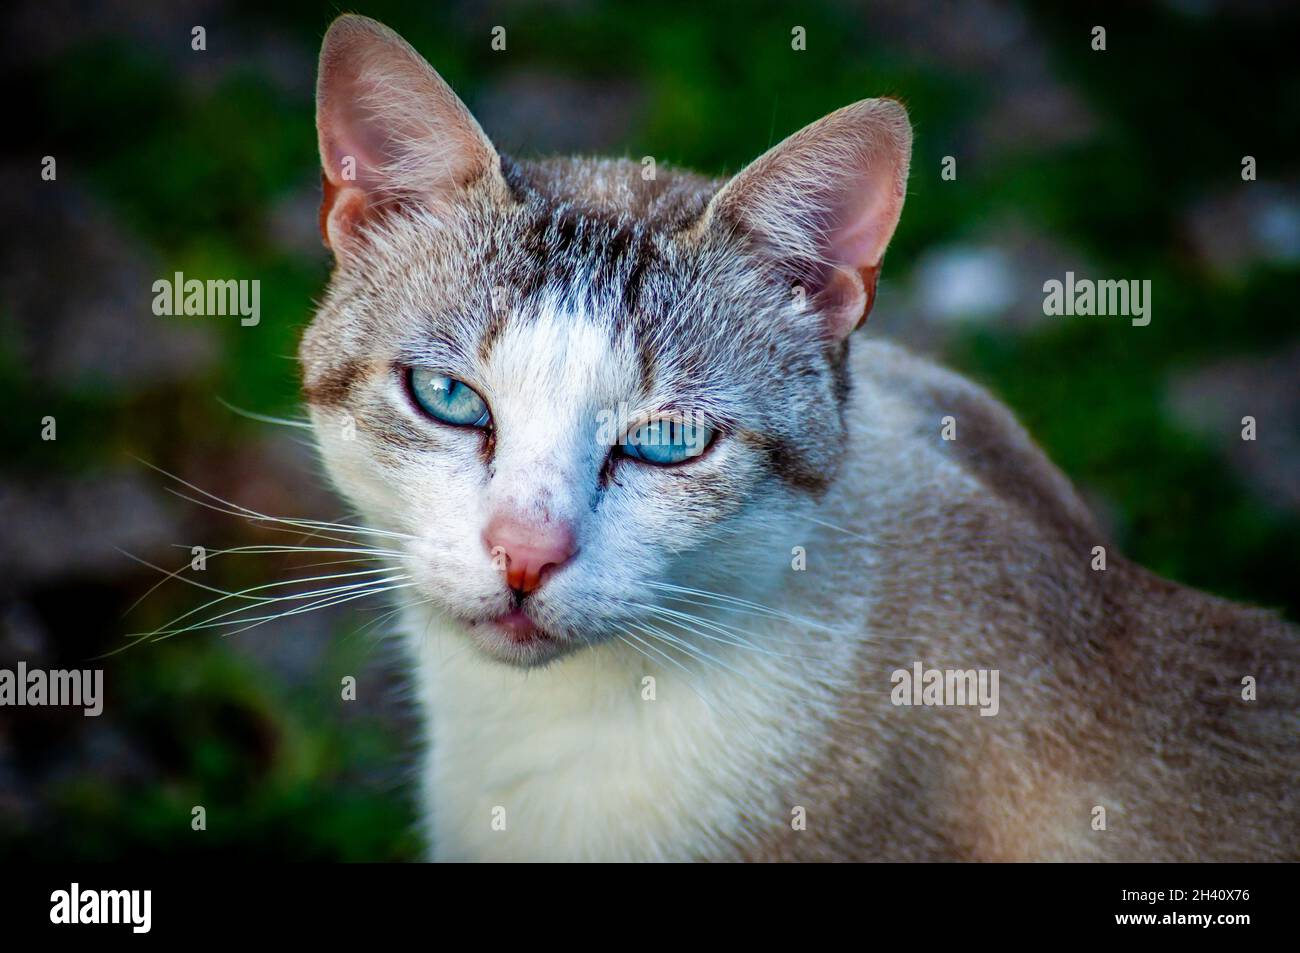 Closeup of grey, beige and white Tabby cat with blue green eyes staring into camera. Stock Photo